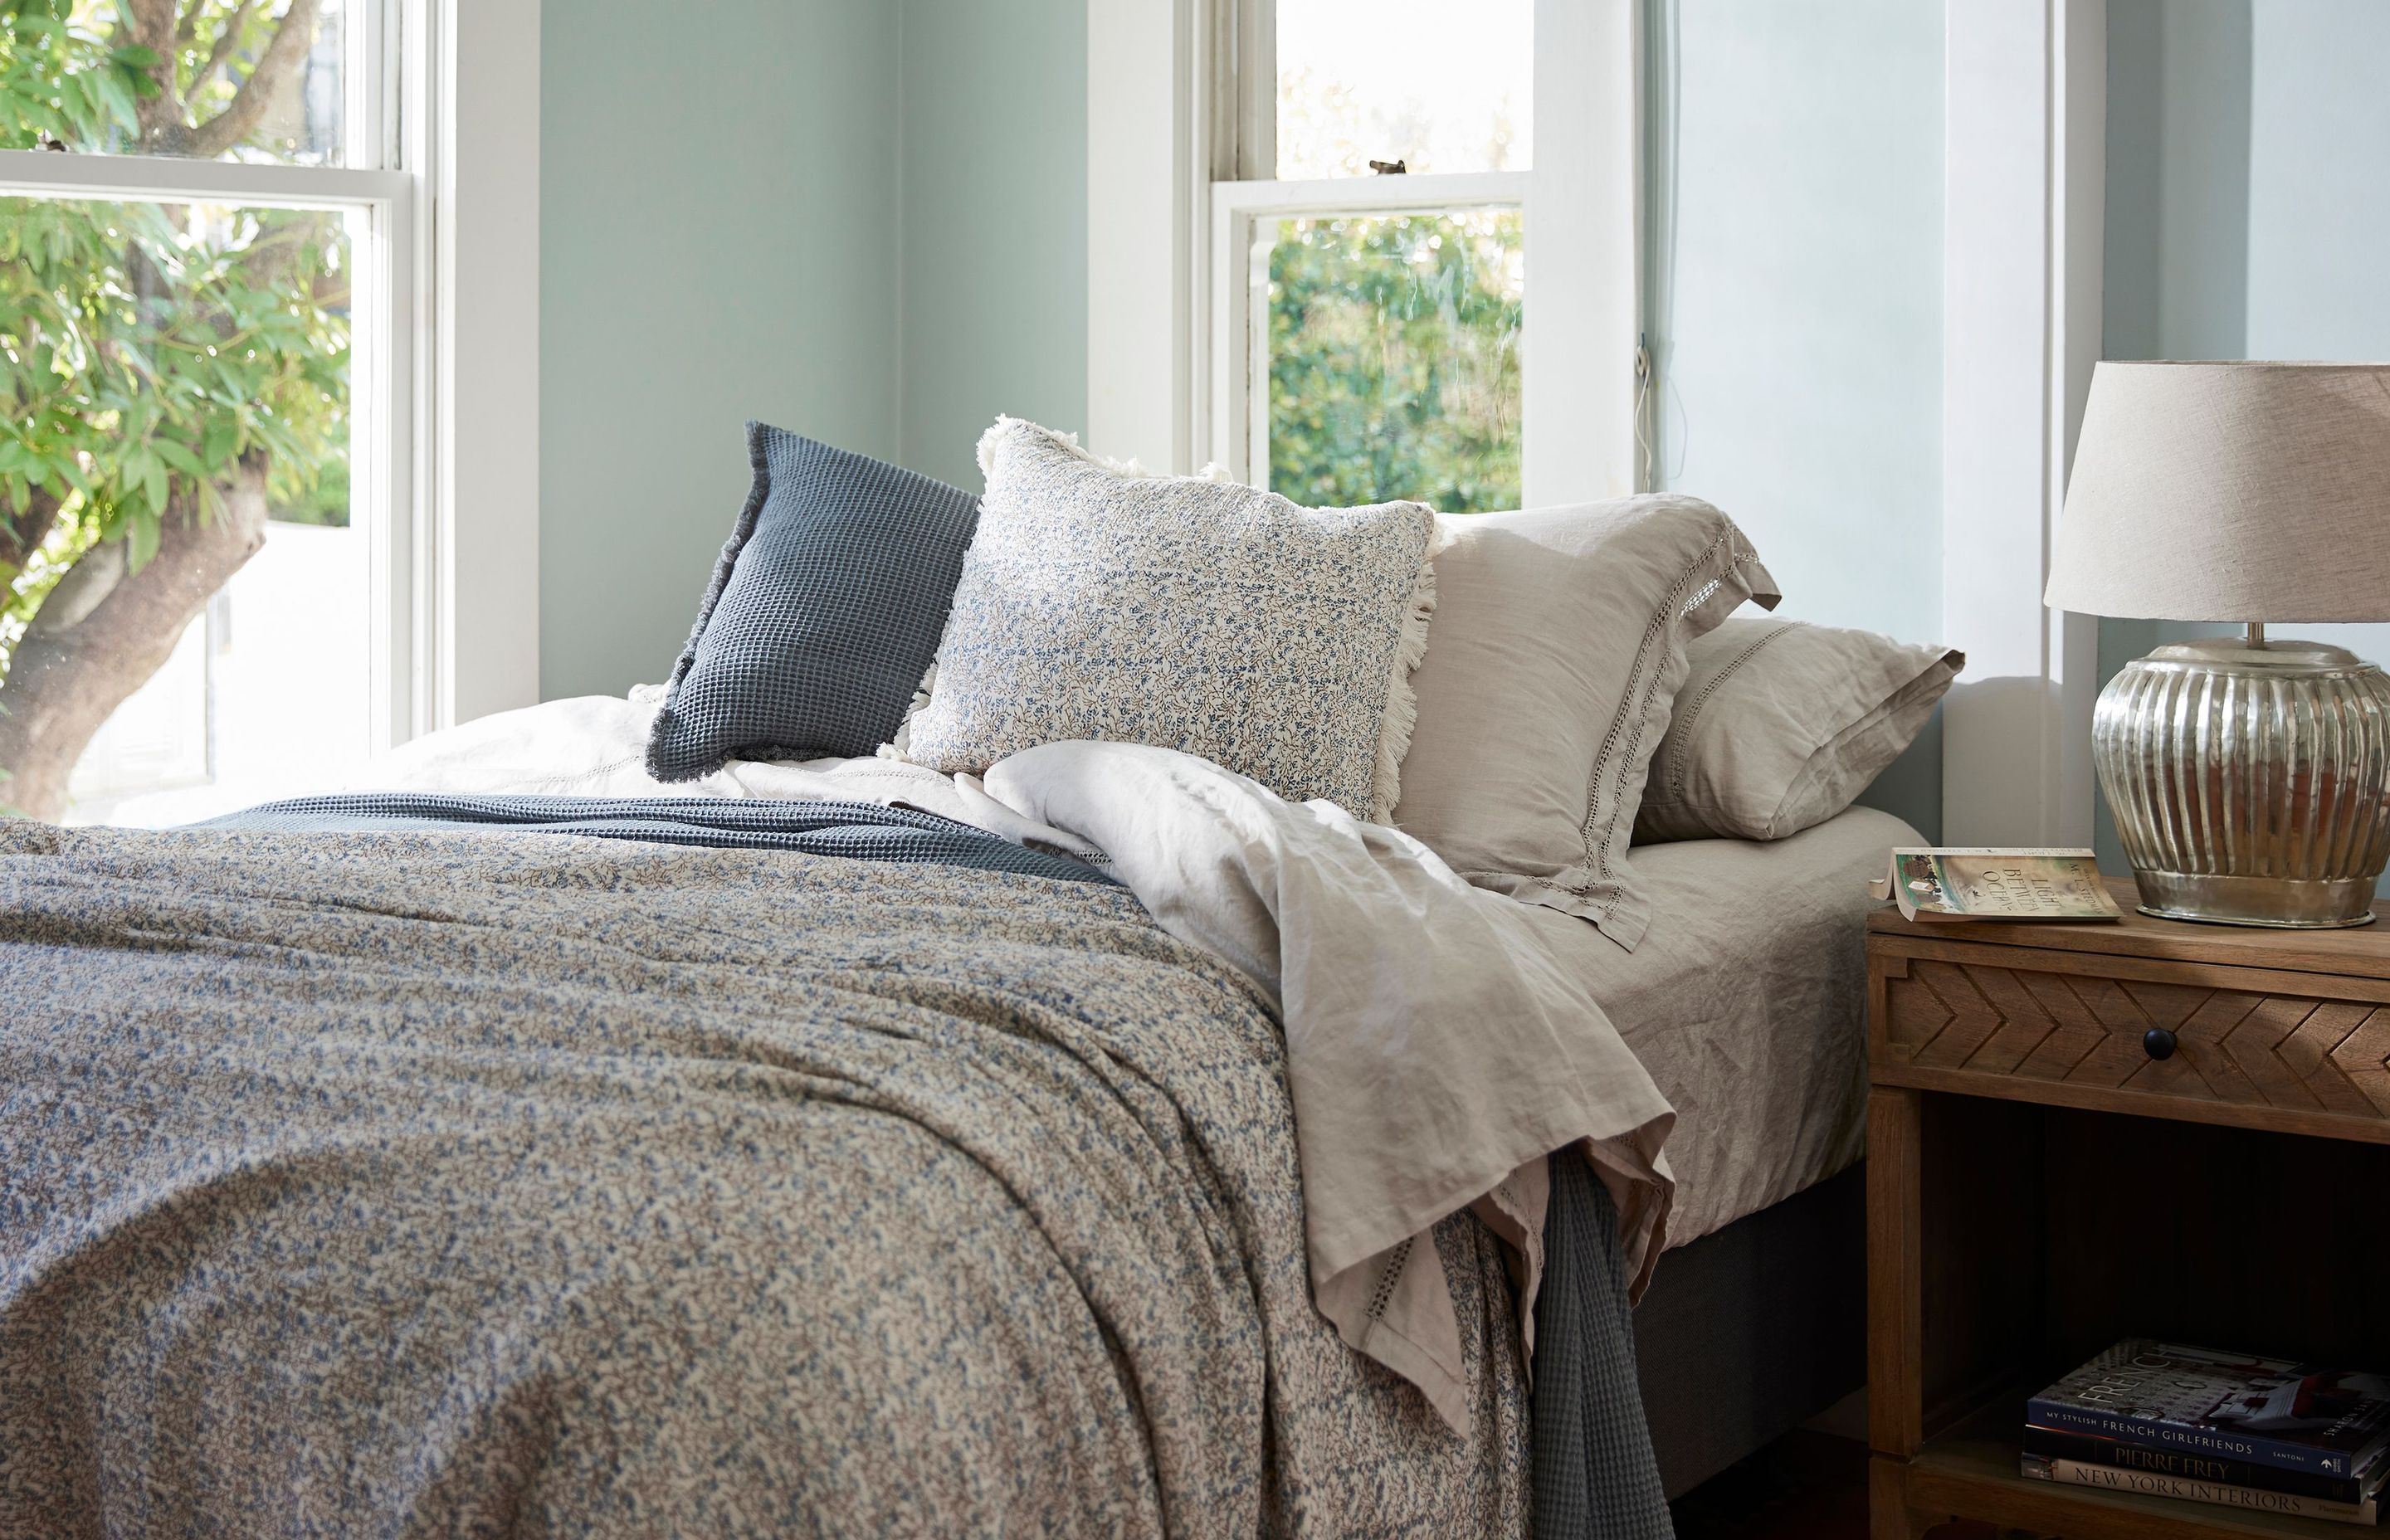 Powdery and pale blues inspired by the colours of the sky have been used in the bedroom to form a calming and restful space.